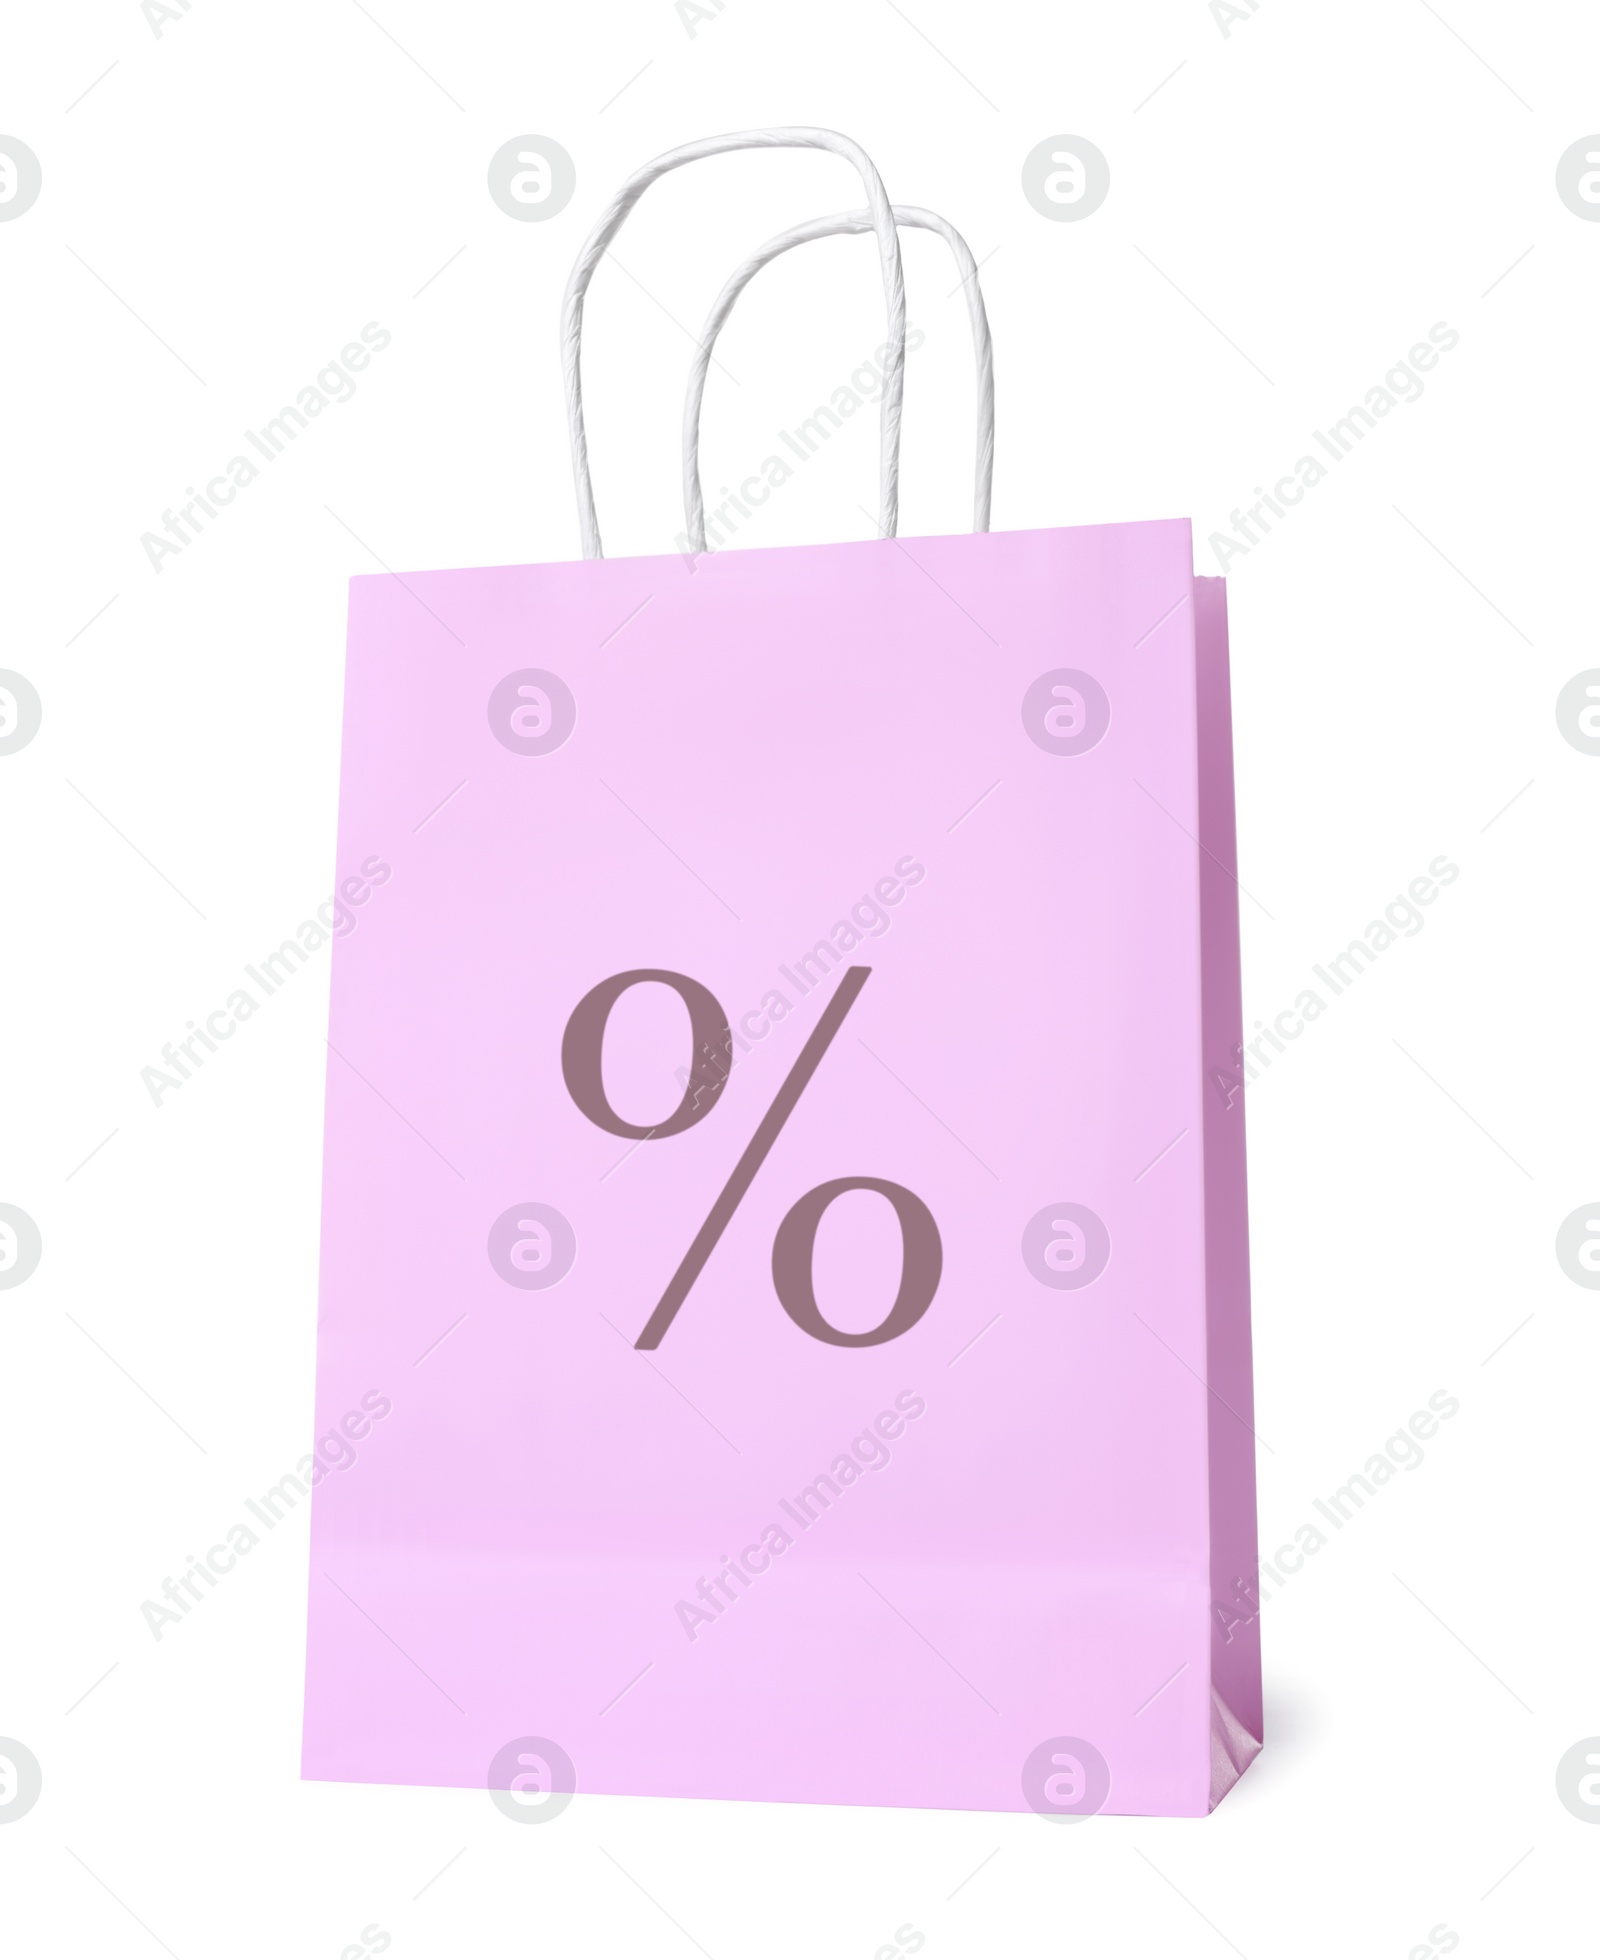 Image of Pink paper bag with percent sign isolated on white